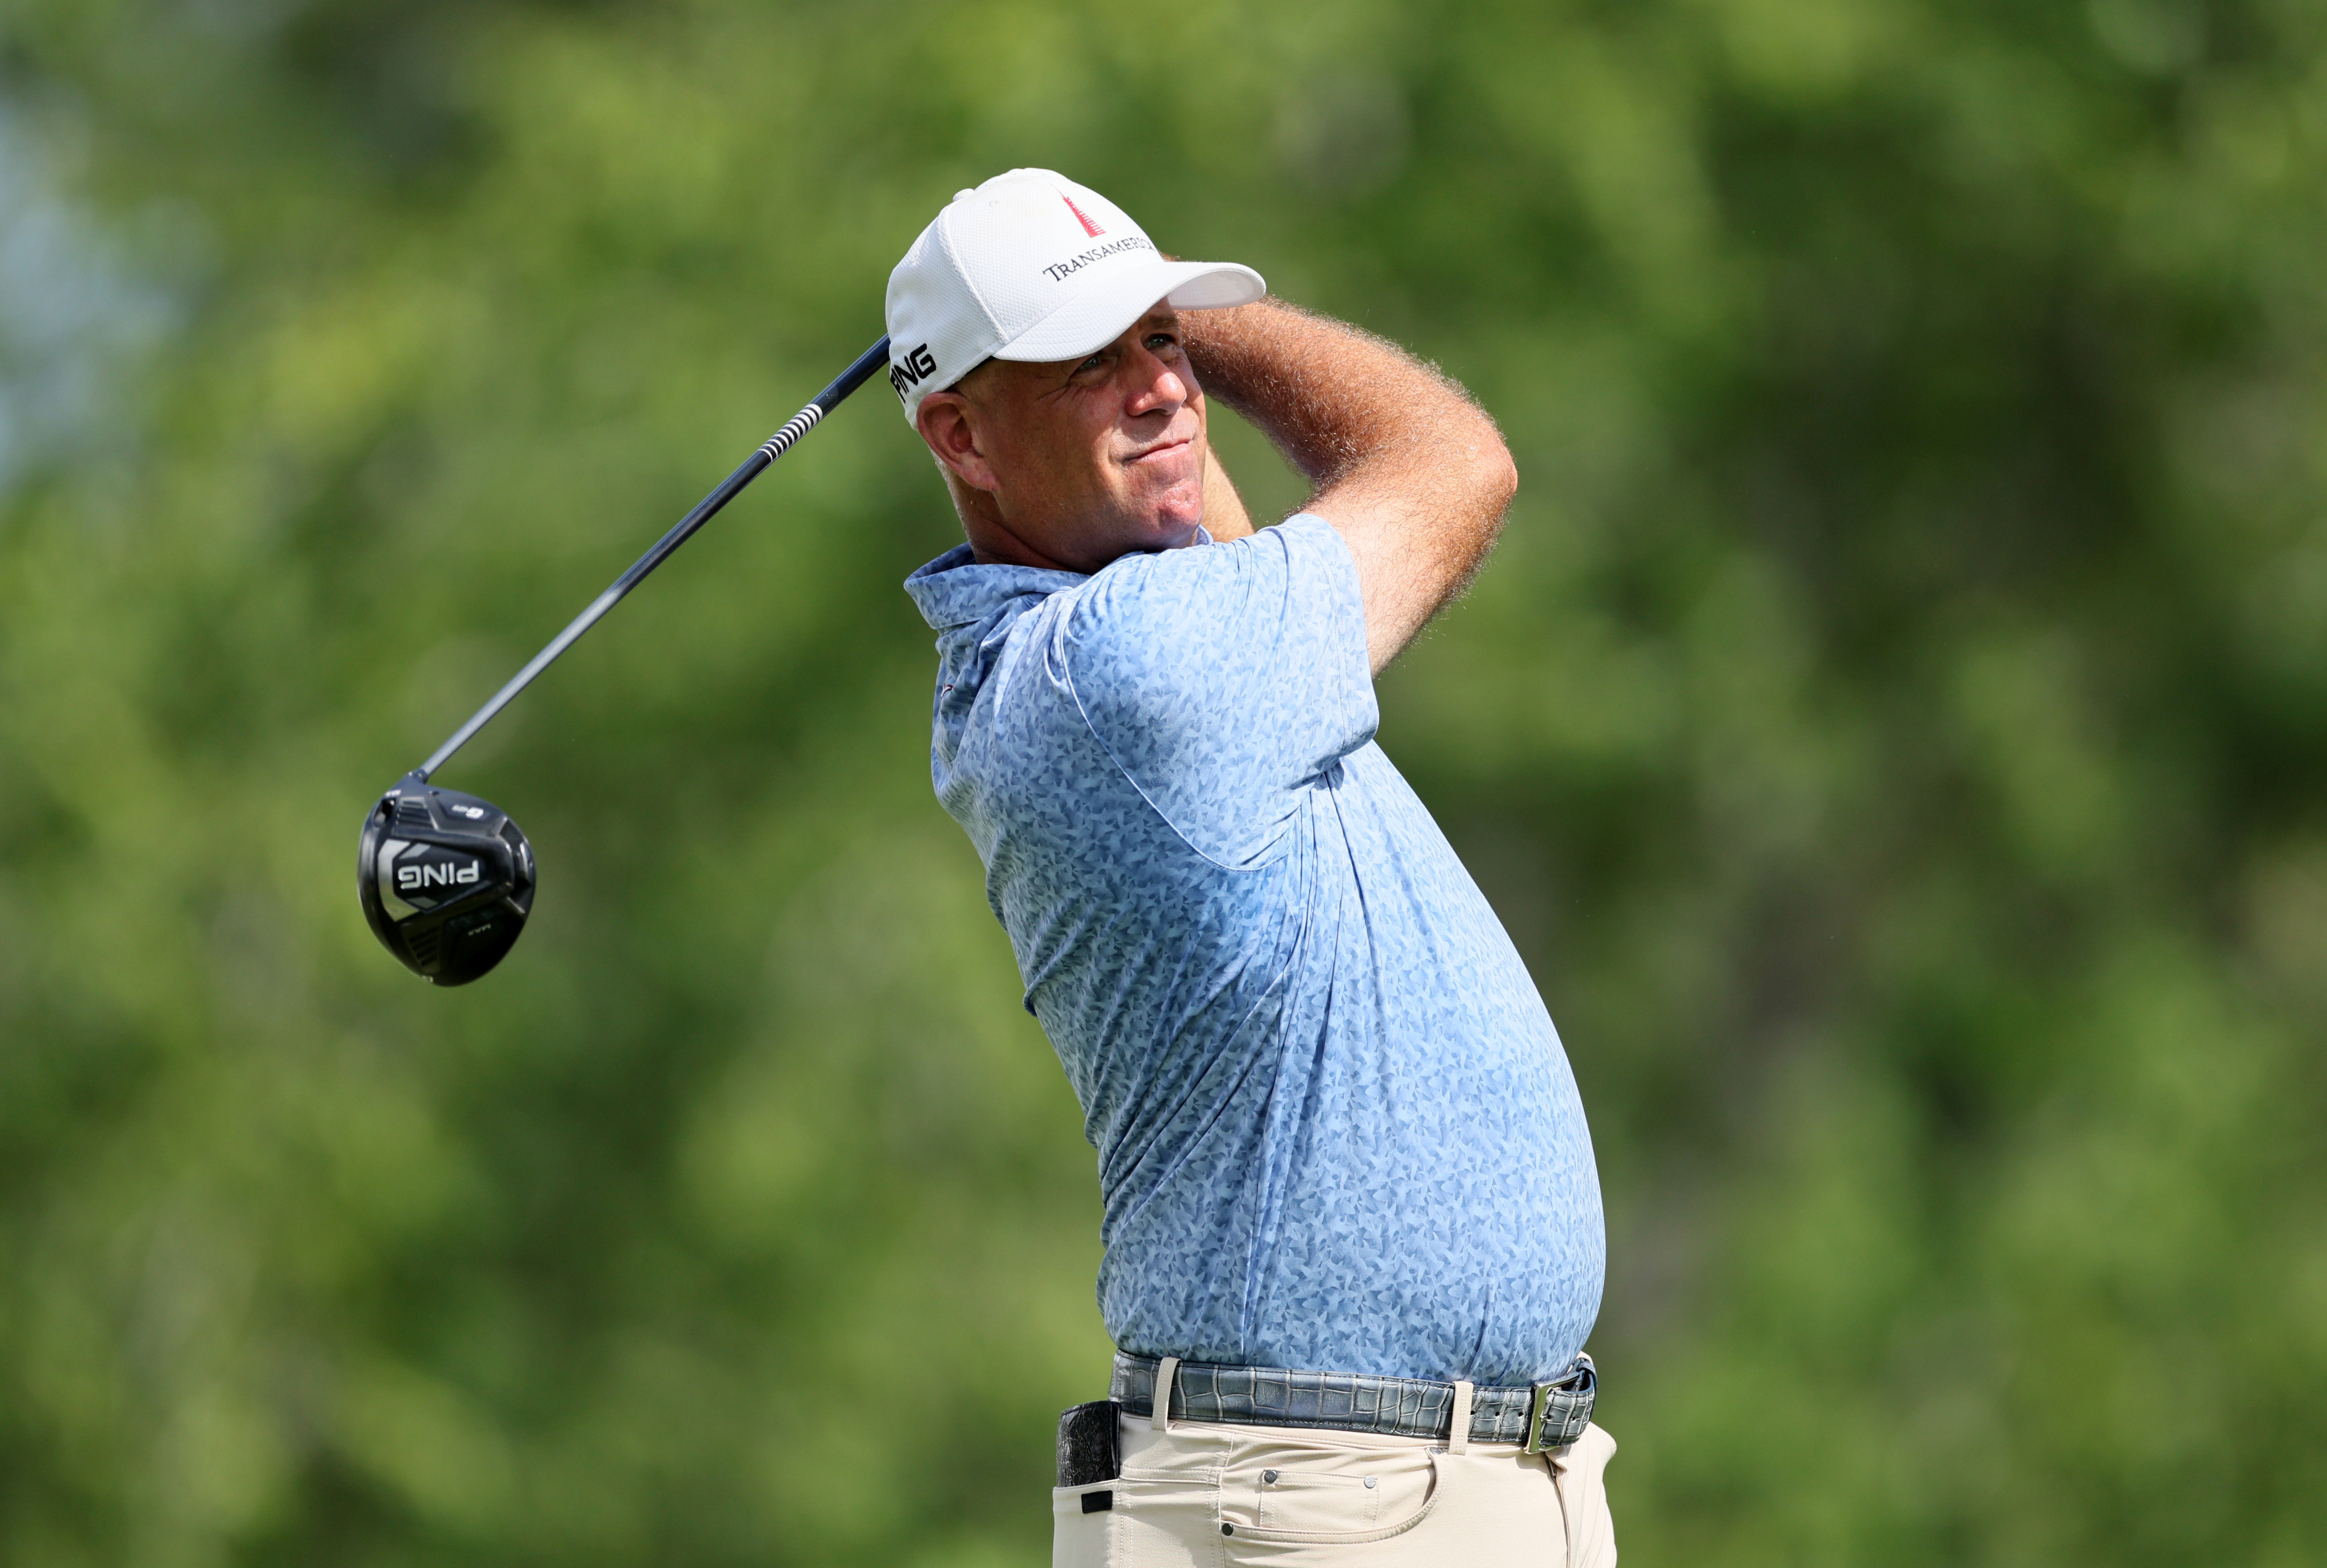 Stewart Cink of the United States plays his shot from the 17th tee during the first round of the FedEx St. Jude Championship at TPC Southwind on August 11, 2022 in Memphis, Tennessee.